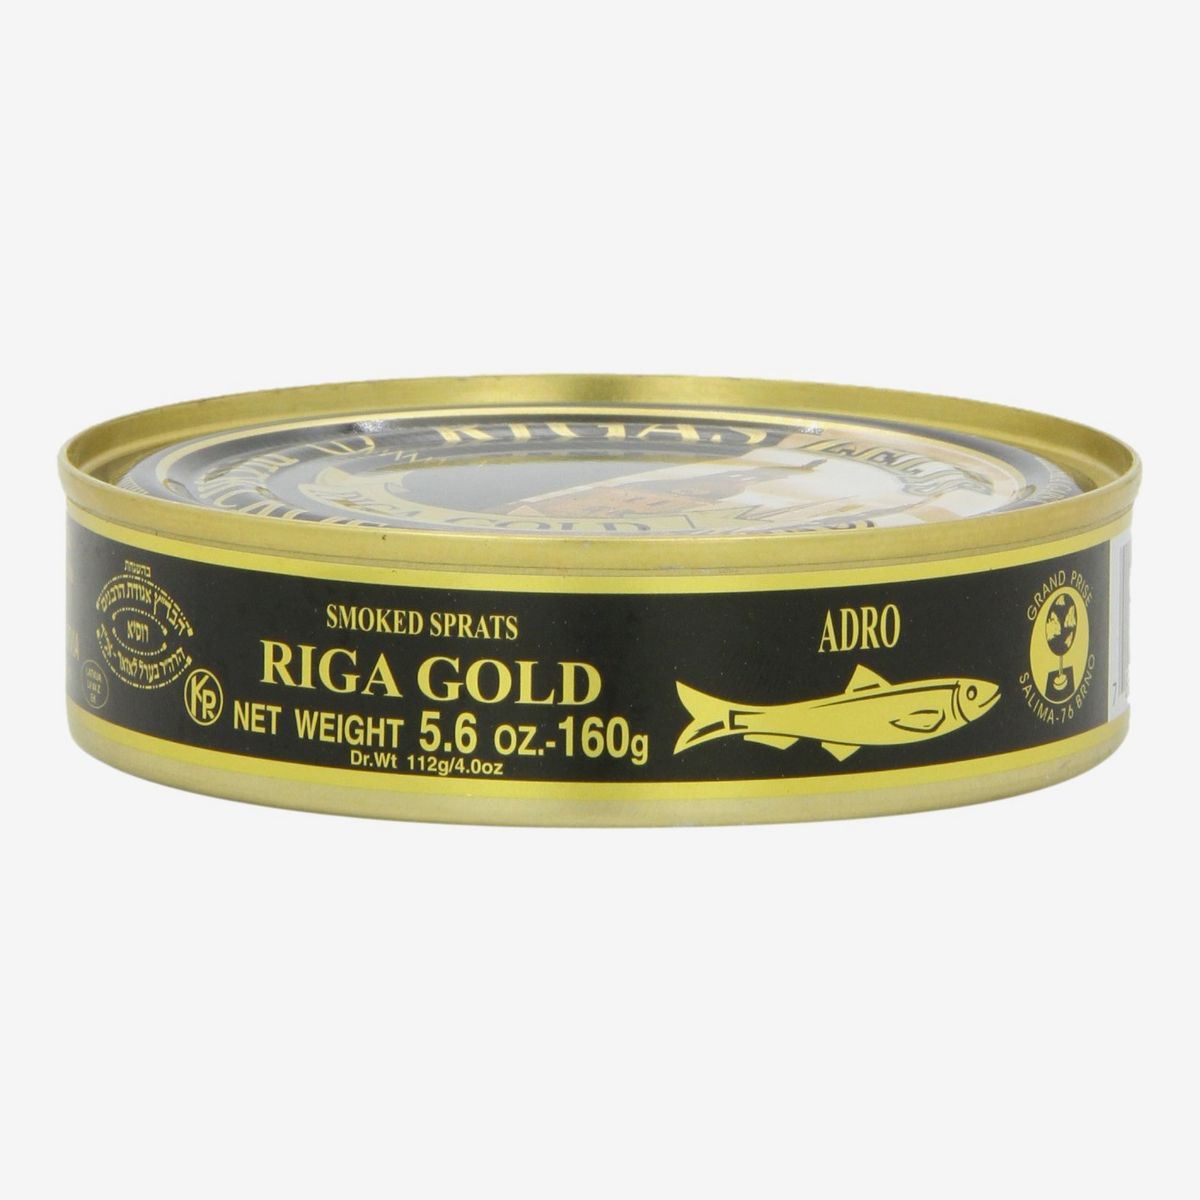 A can of Riga Smoked Sprats